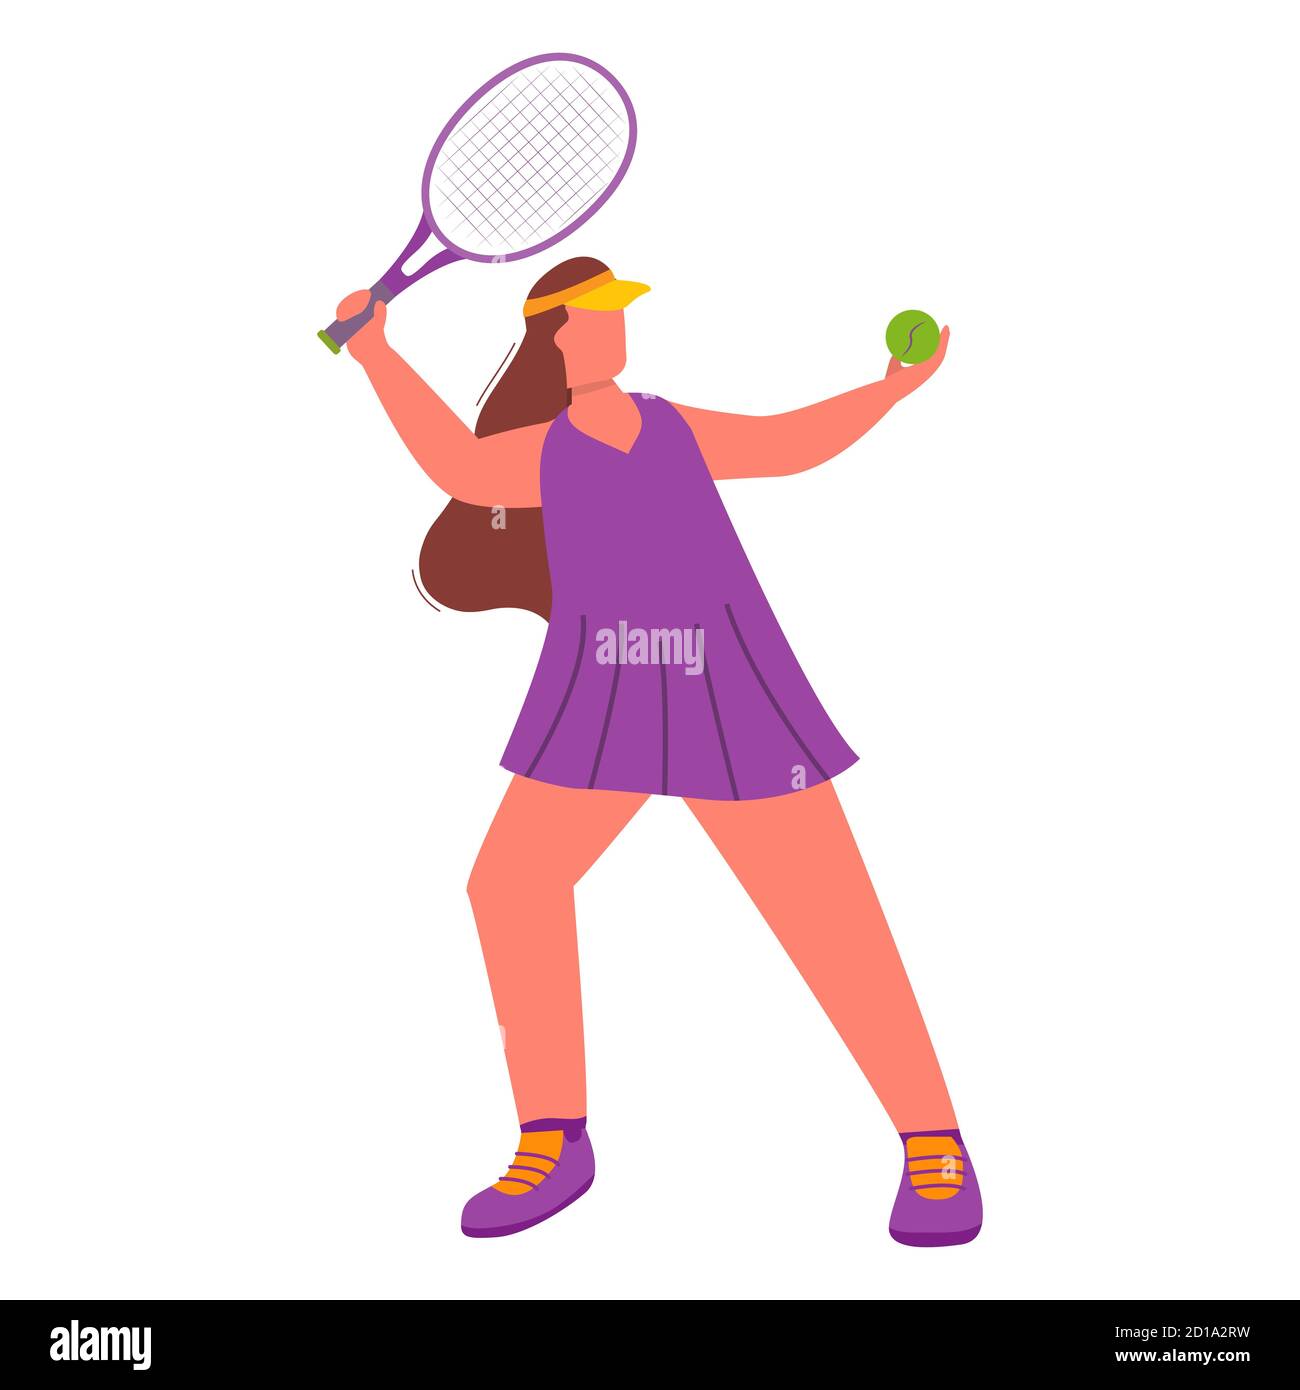 Woman tennis player with a racket.Sport game girl artoon character. Stock Vector